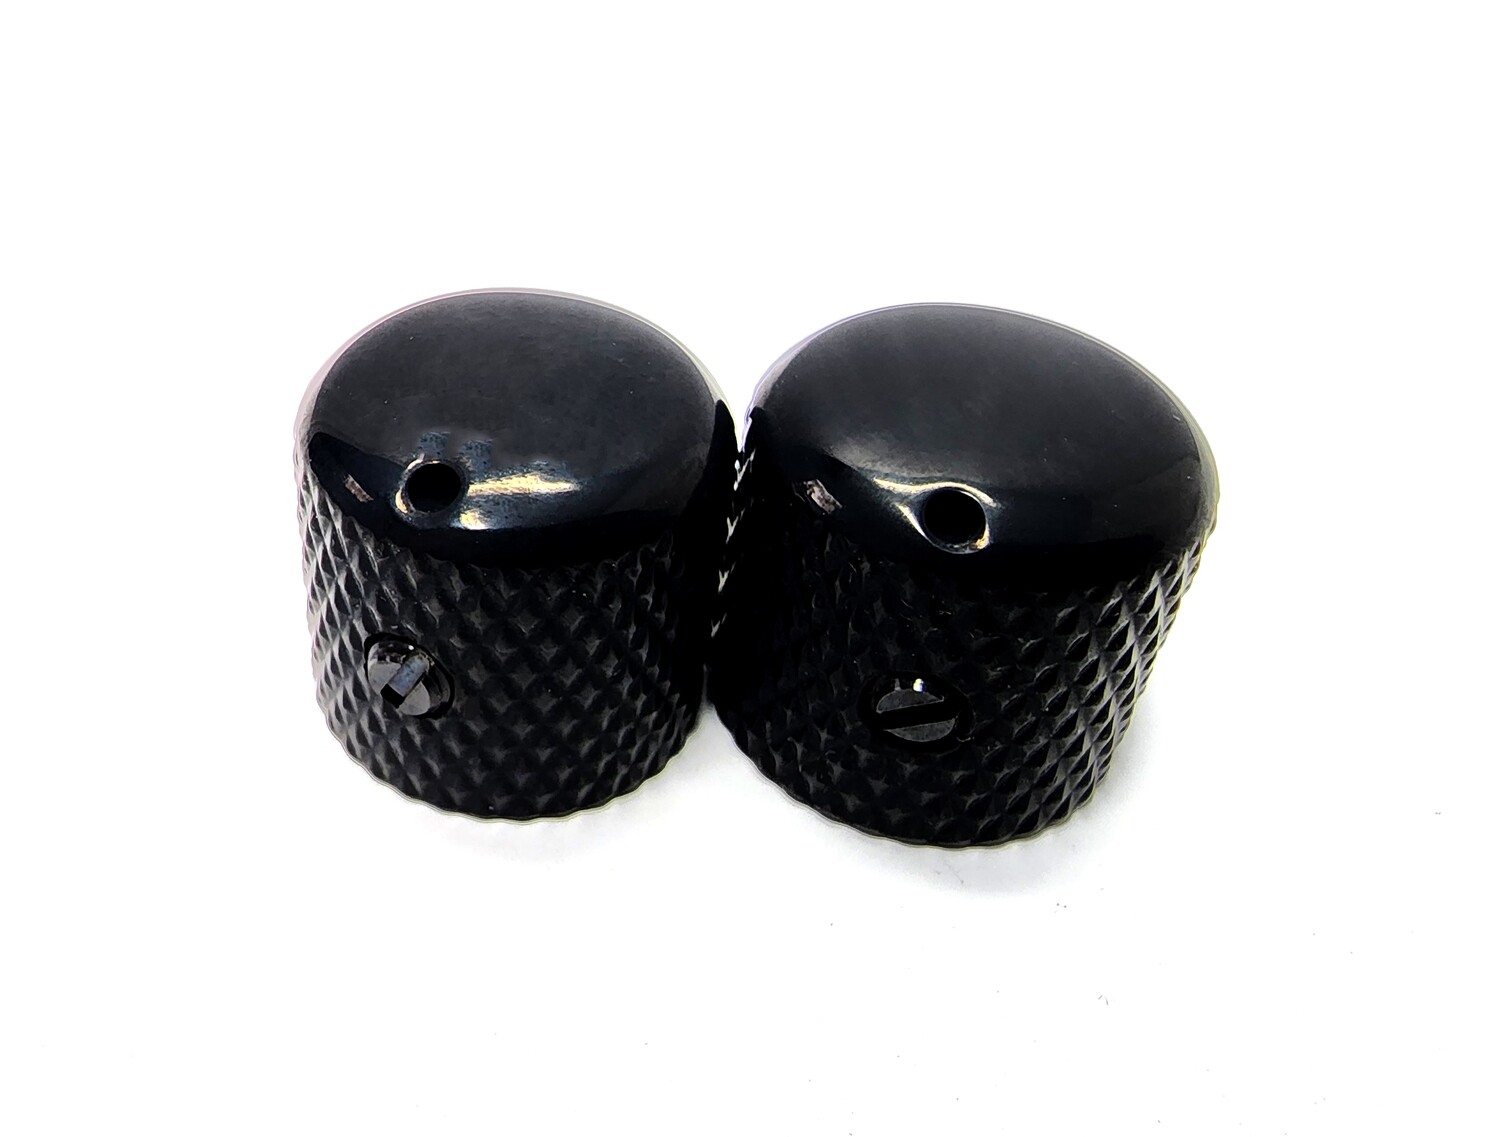 Carparelli Knurled Metal Dome Knobs x 2 Black Dome Top with Indentifier Indent - Black